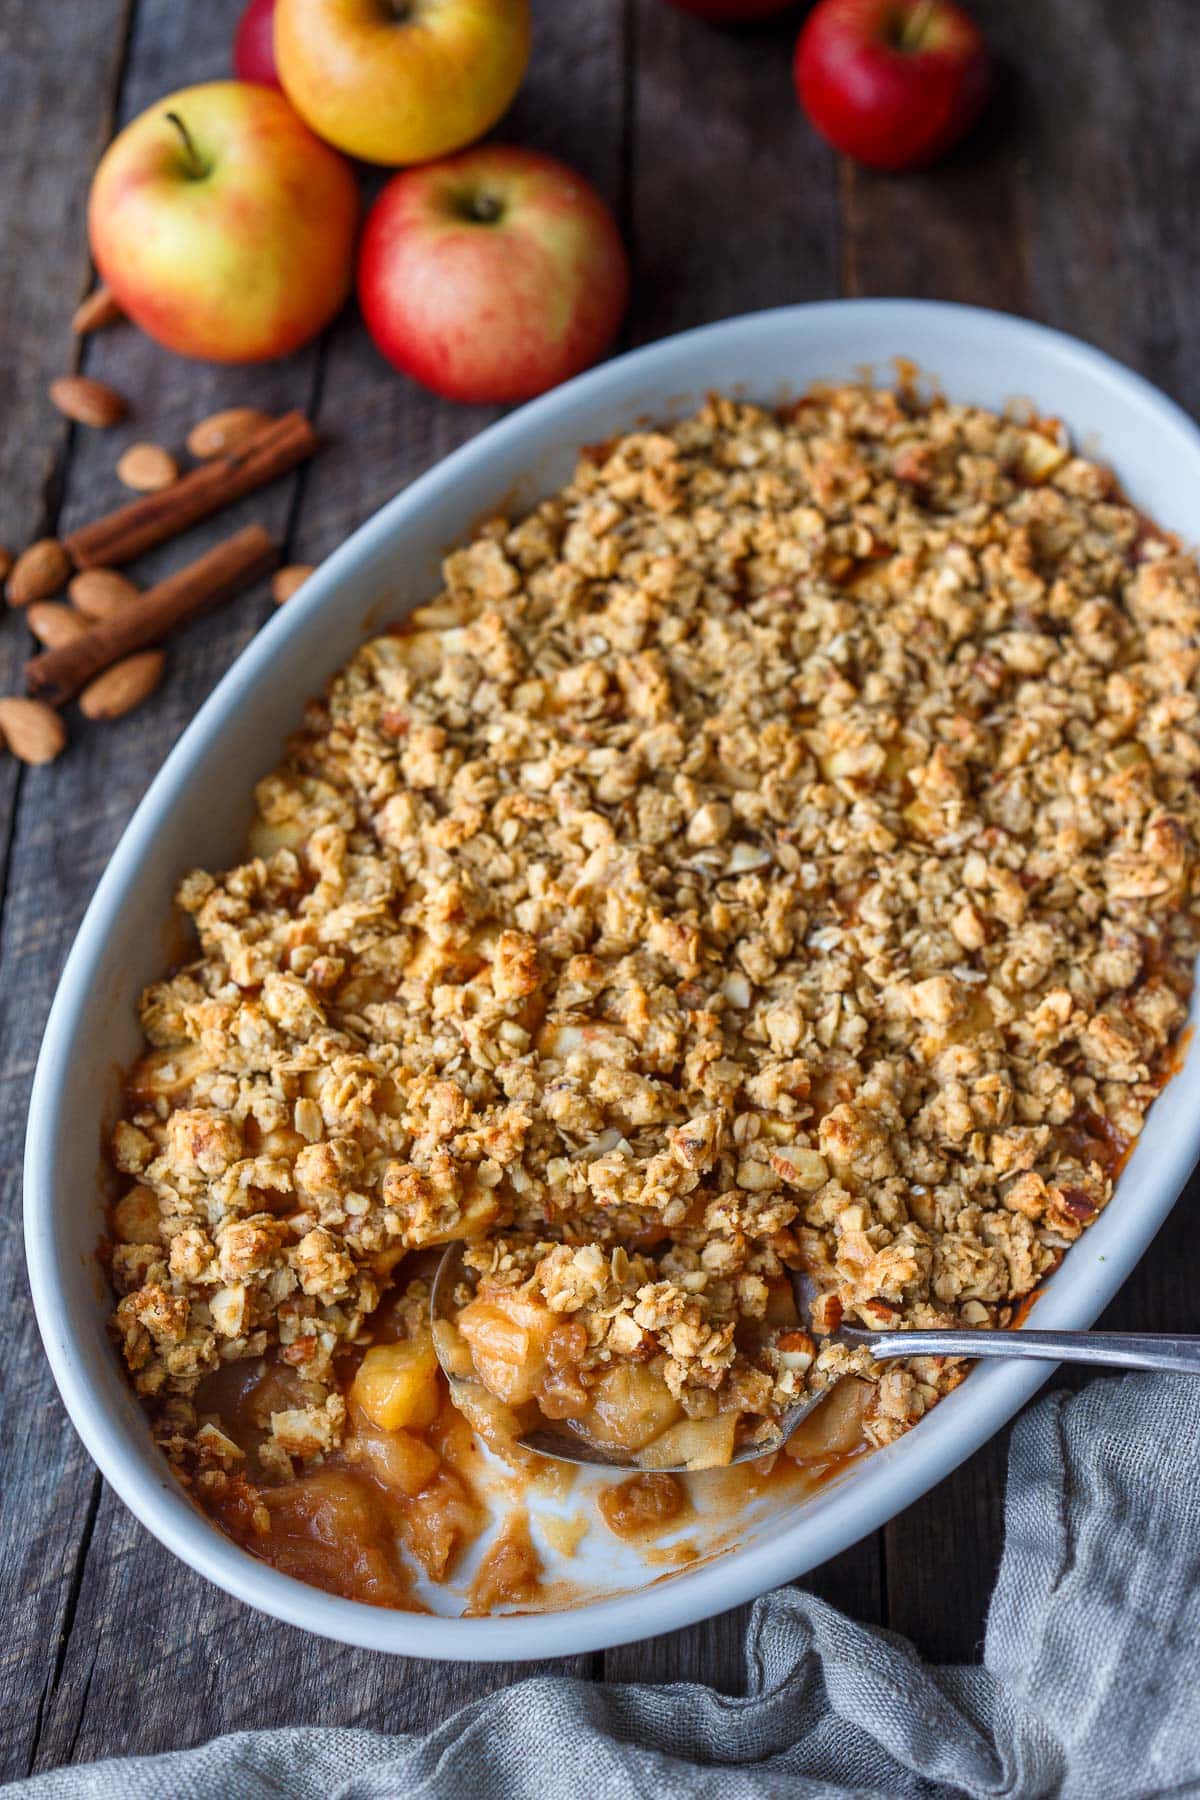 This easy Apple Crisp recipe is so cozy! Deliciously spiced baked apples with a crunchy oat & nut topping that is easy to make! Vegan and gluten-free adaptable.